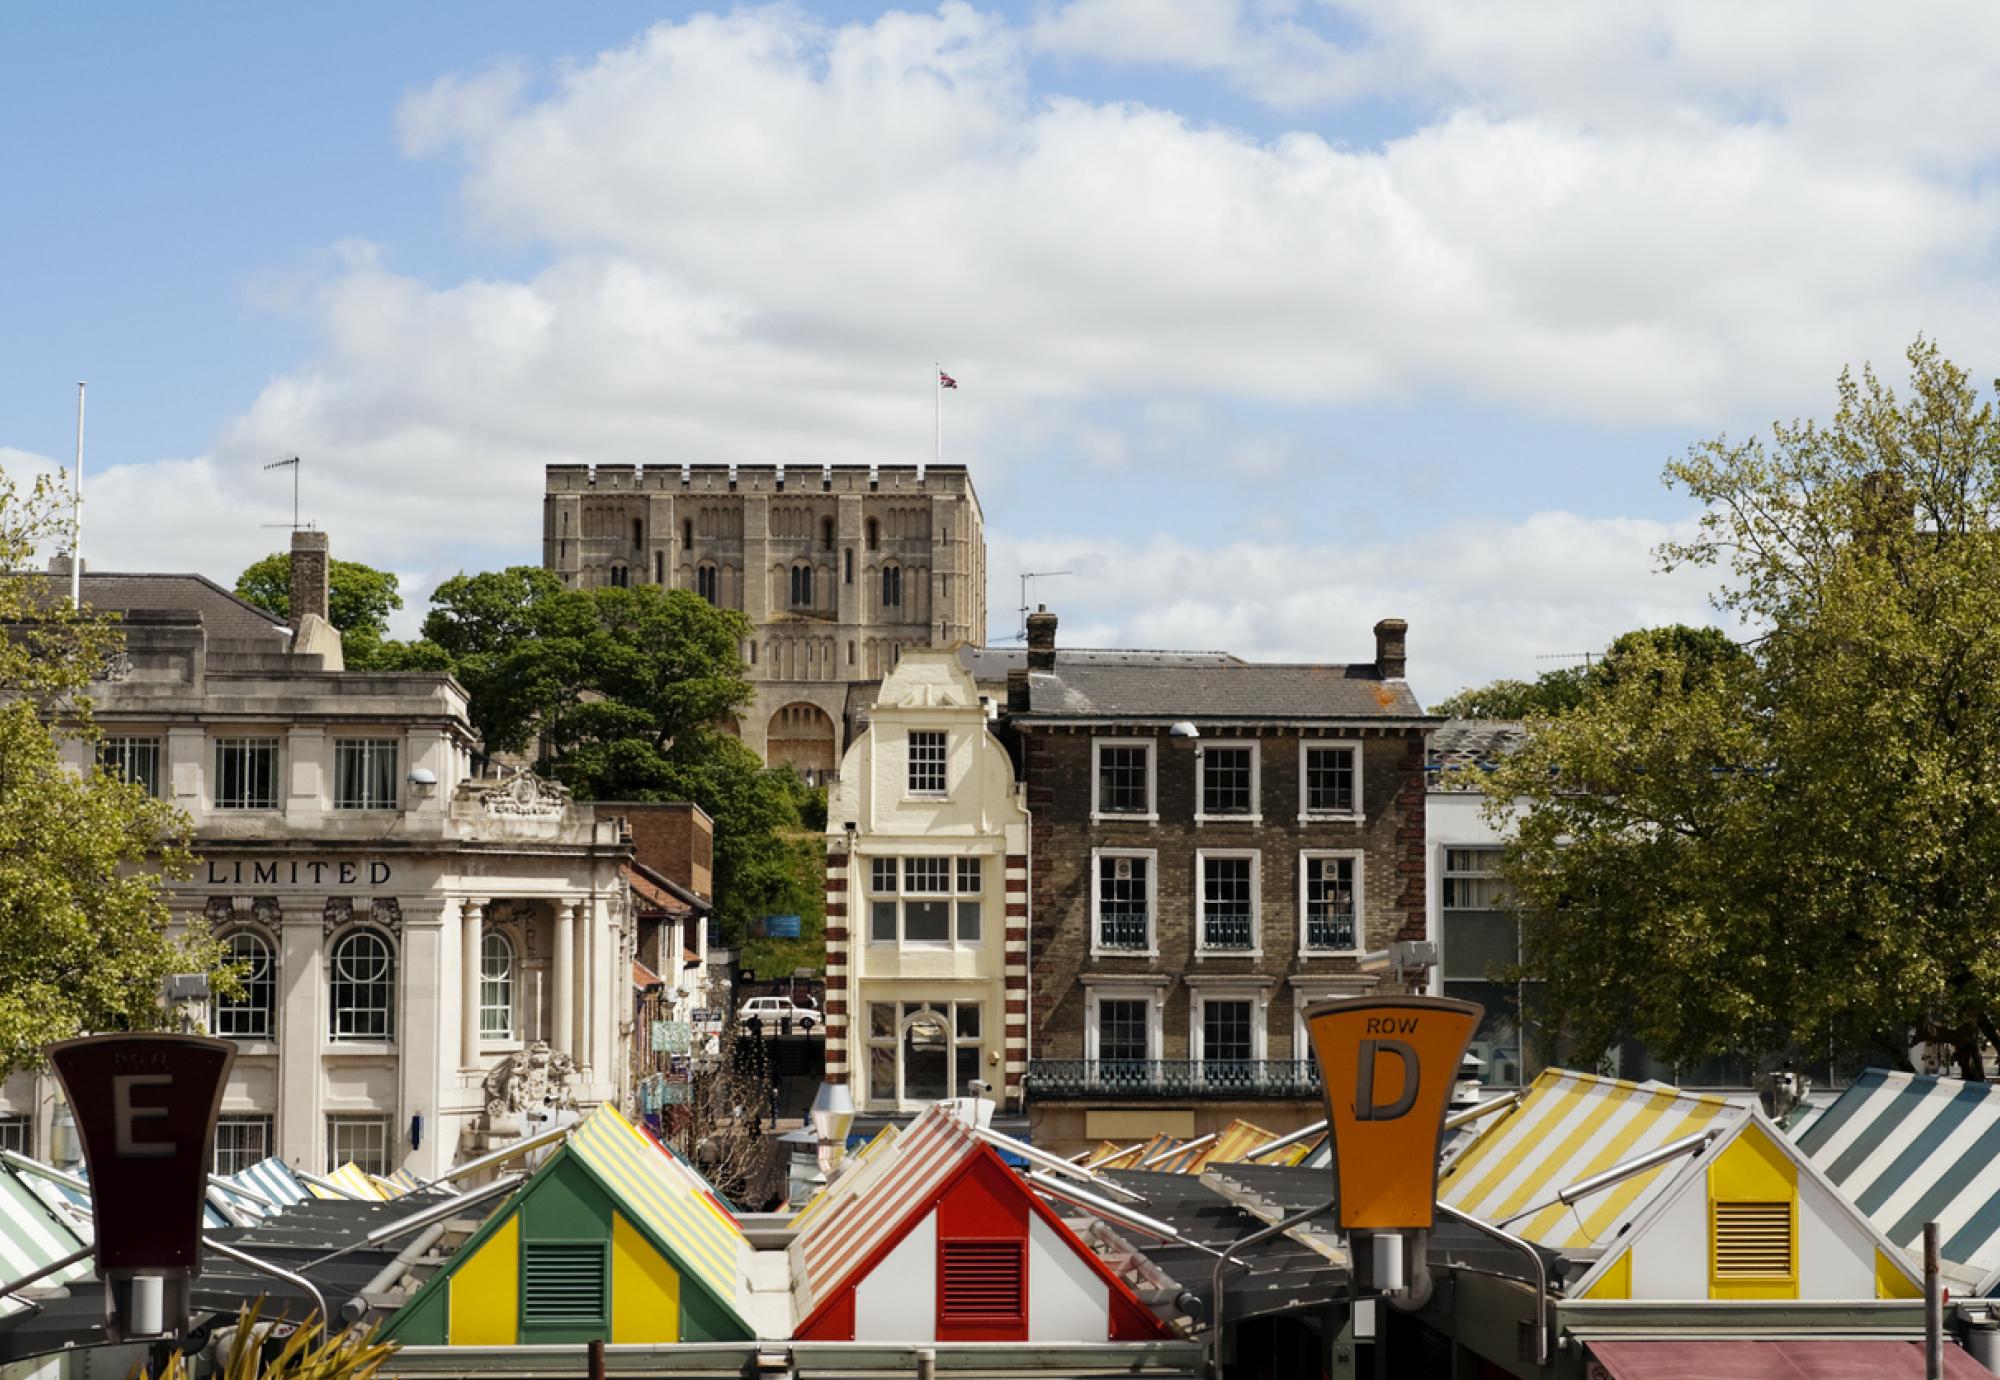 The famous market in the centre of Norwich, with Norwich Castle behind.